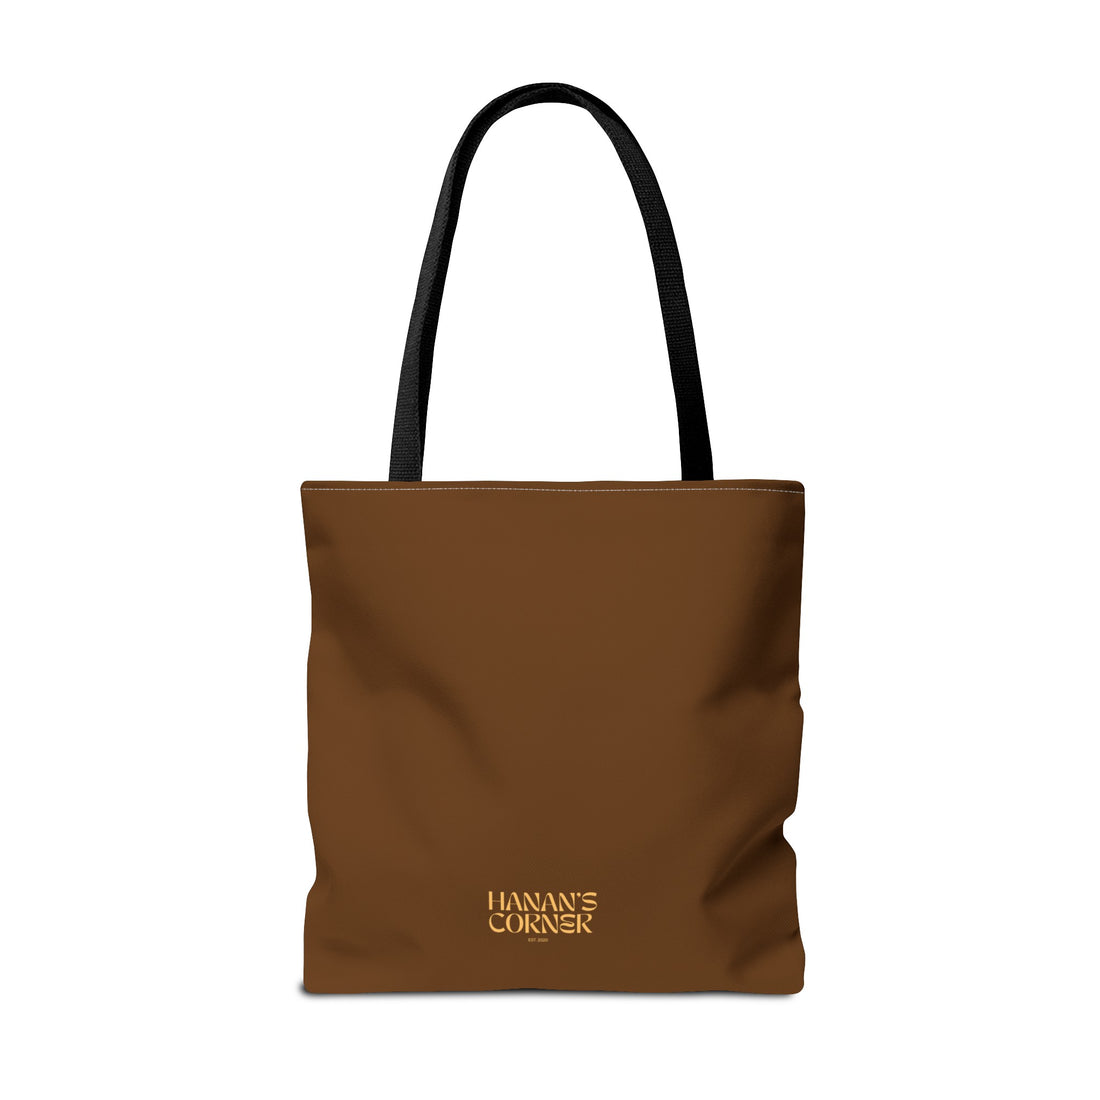 What's today's topic? Revolution - Tote Bag